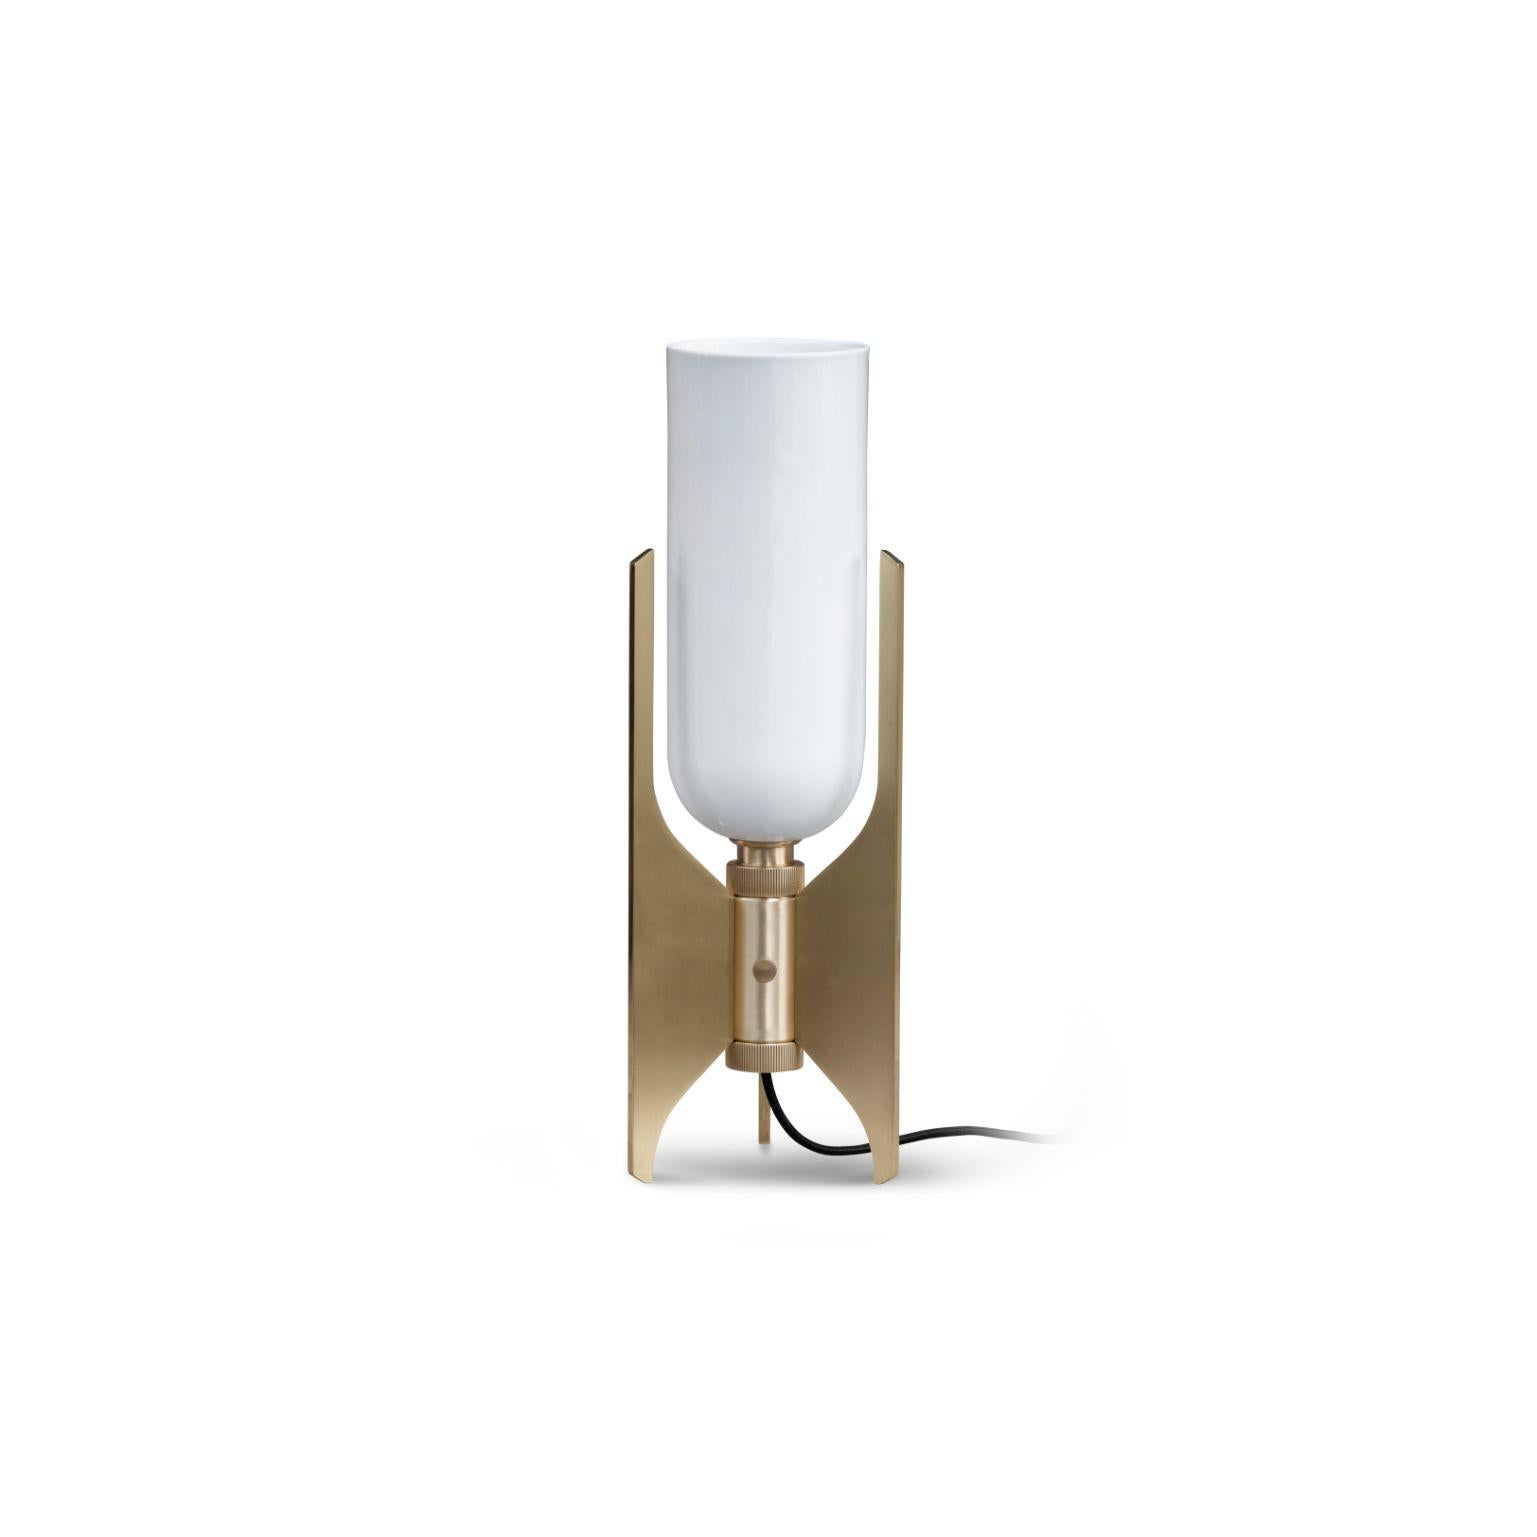 Pennon table lamp - brass by Bert Frank
Dimensions: 42 x 13.9 x 15.7 cm
Materials: Brass, Bone China

When Adam Yeats and Robbie Llewellyn founded Bert Frank in 2013 it was a meeting of minds and the start of a collaborative creative partnership